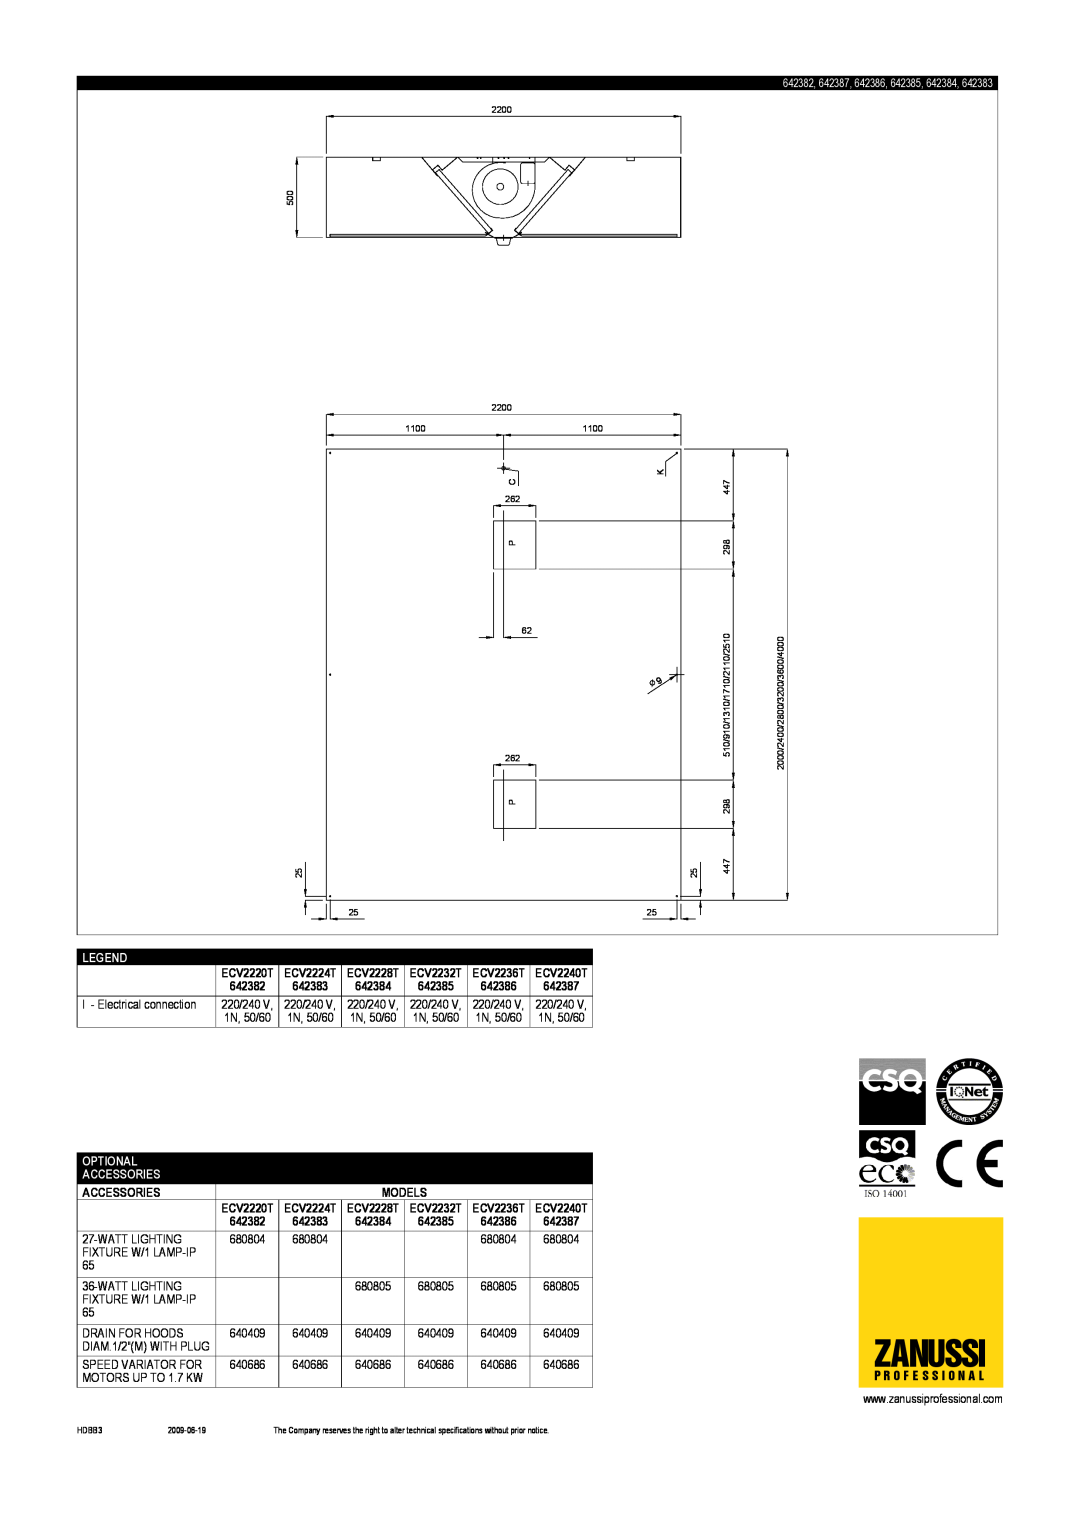 Zanussi ECV2224T, ECV2236T, ECV2240T, ECV2228T Zanussi, I - Electrical connection, 220/240, Optional, Accessories, Models 